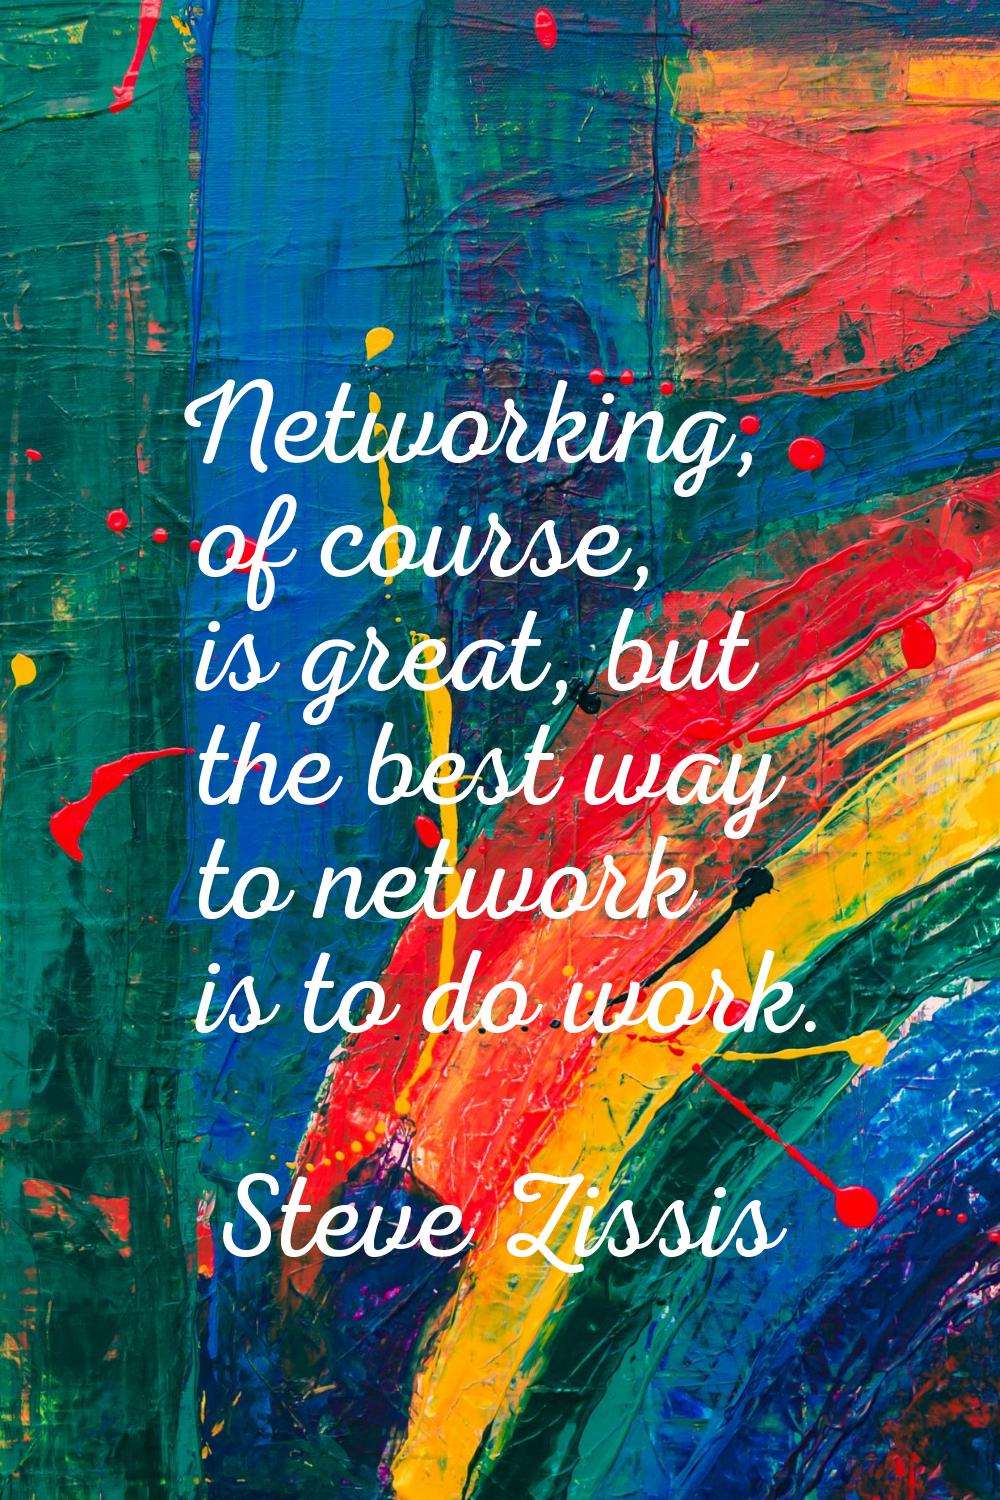 Networking, of course, is great, but the best way to network is to do work.